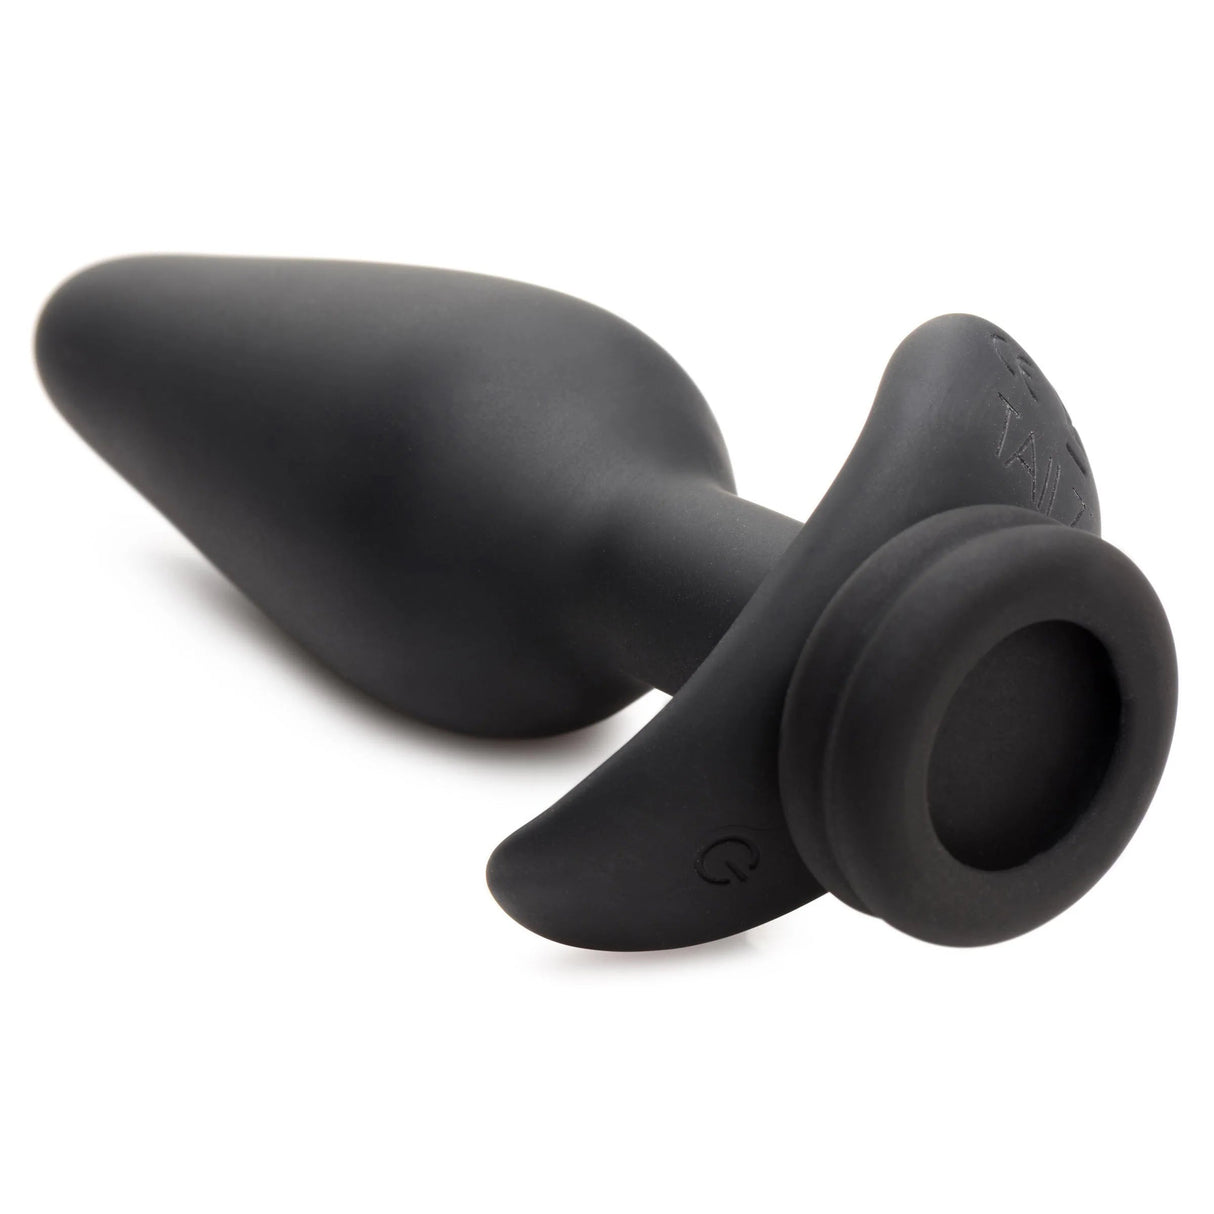 Tailz Snap On Interchangeable Vibrating Silicone Anal Plug